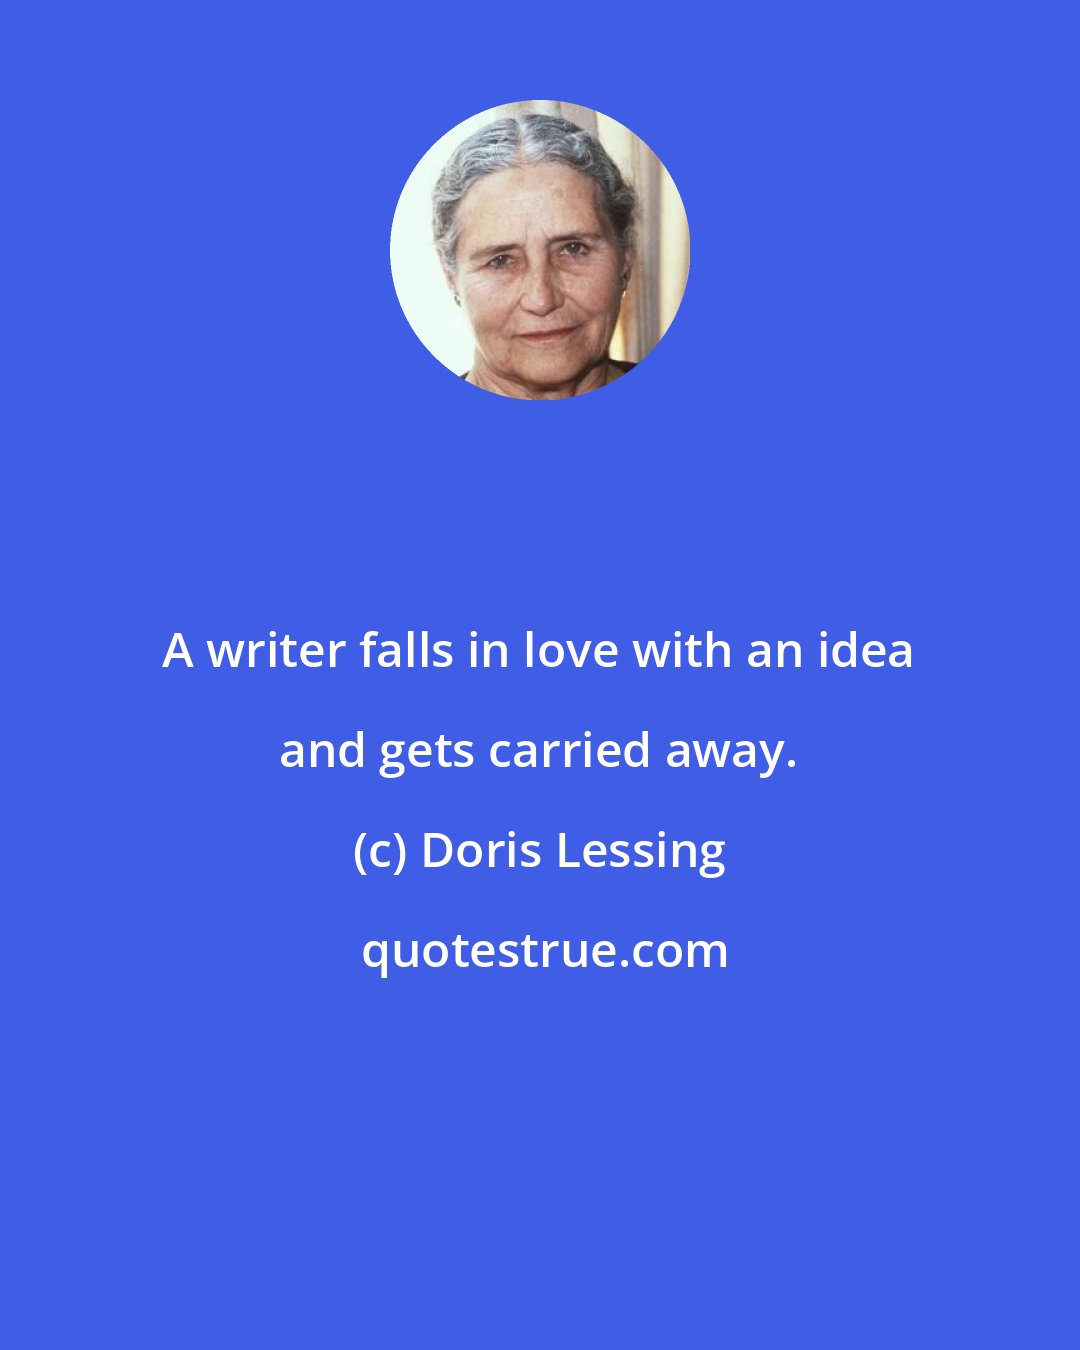 Doris Lessing: A writer falls in love with an idea and gets carried away.